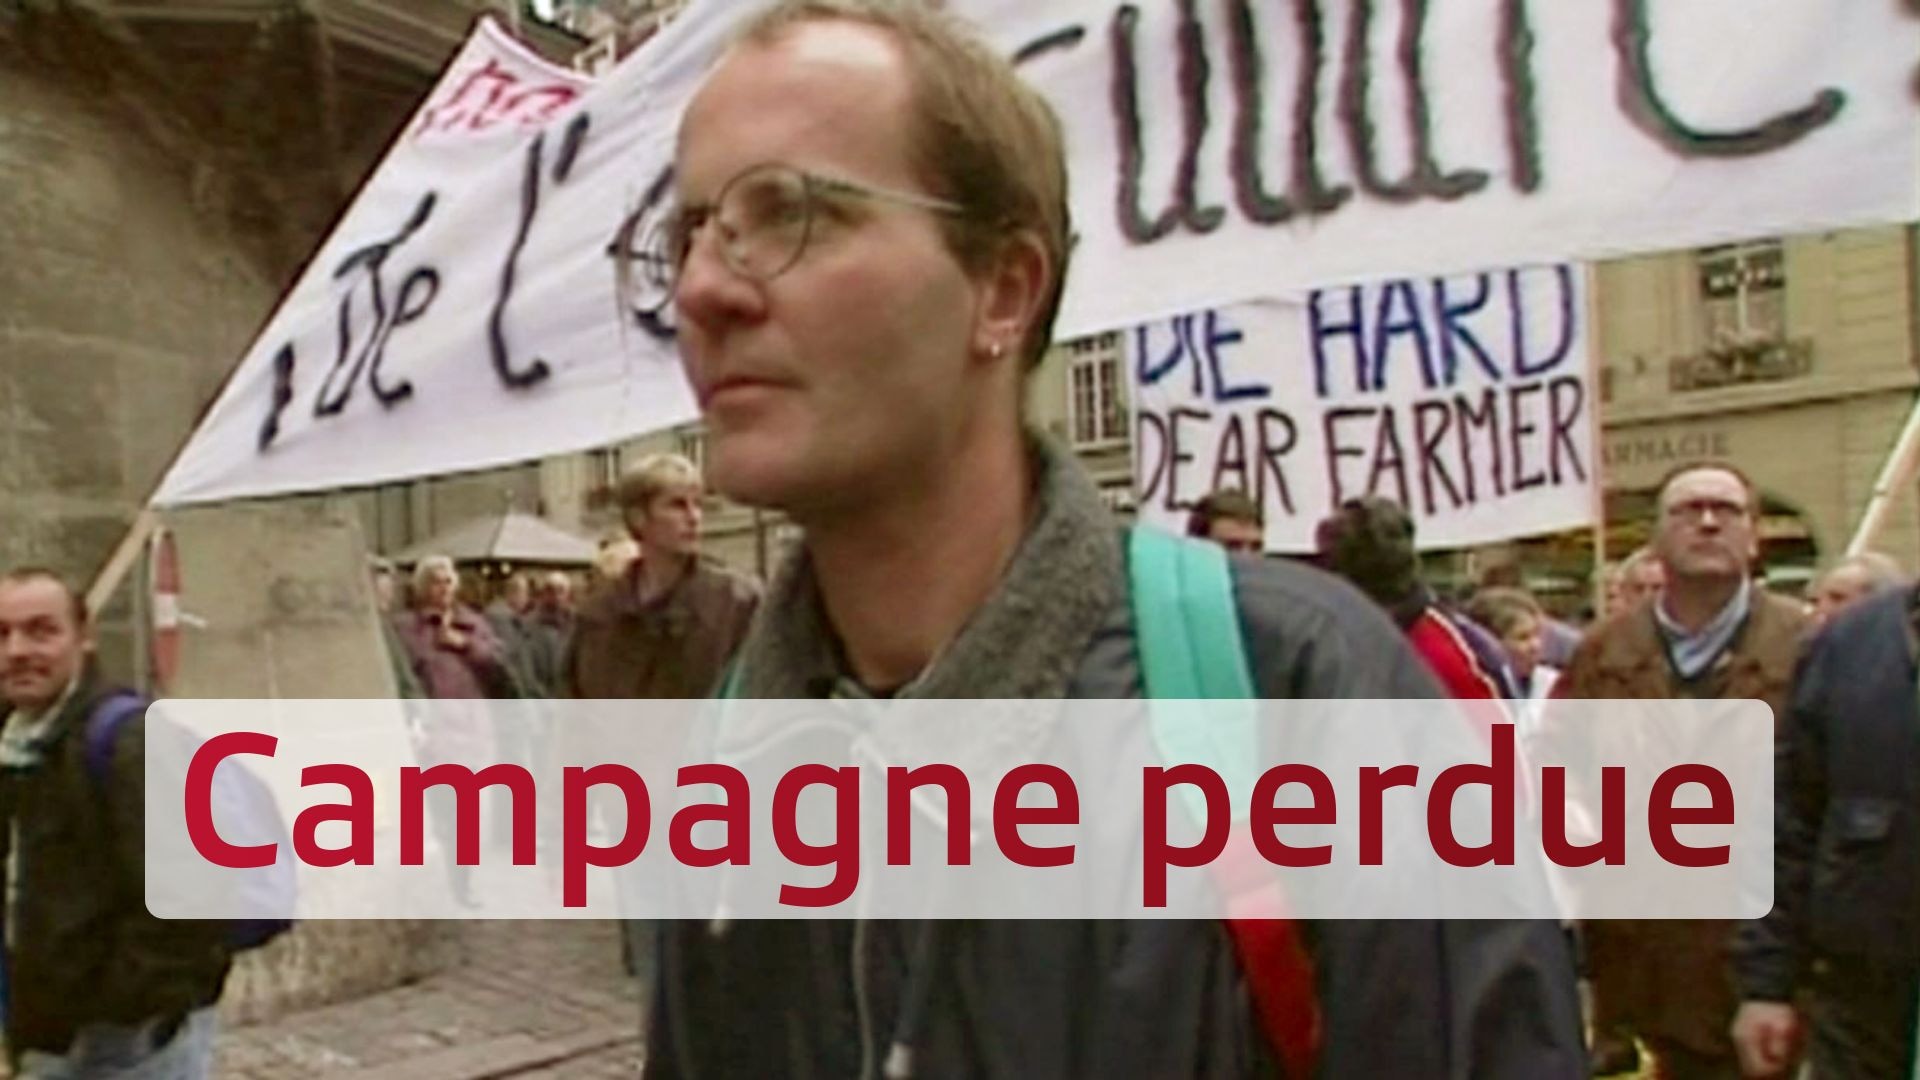 Campagne perdue